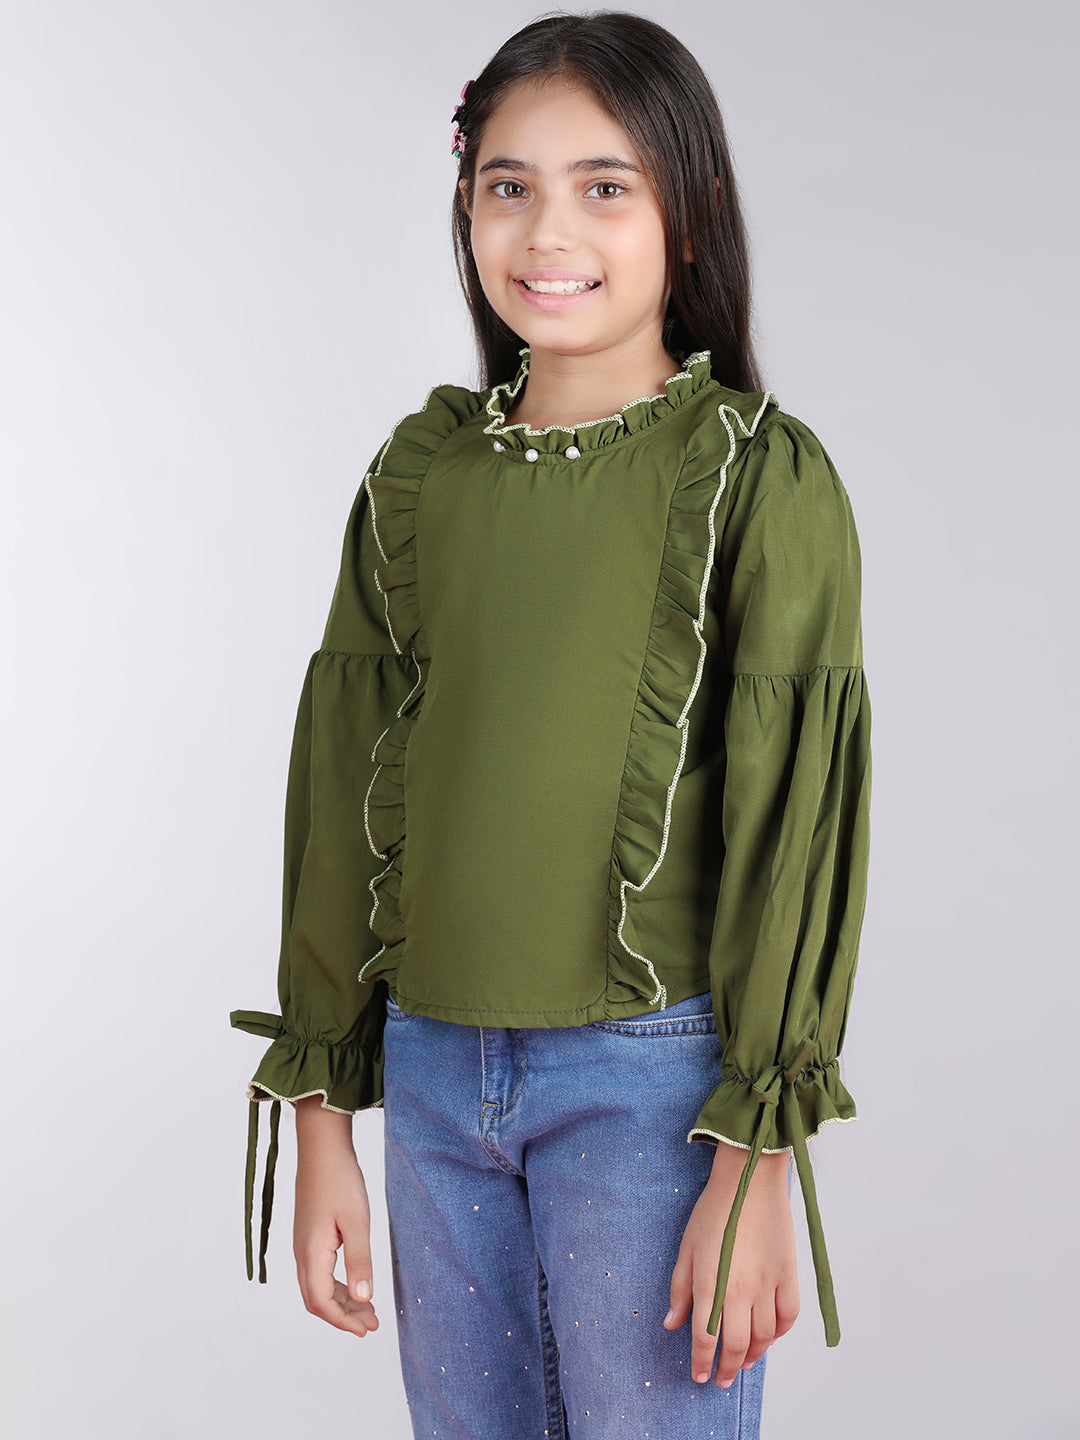 Cutiekins Solid Full Sleeves Polyester Tops-Green & White